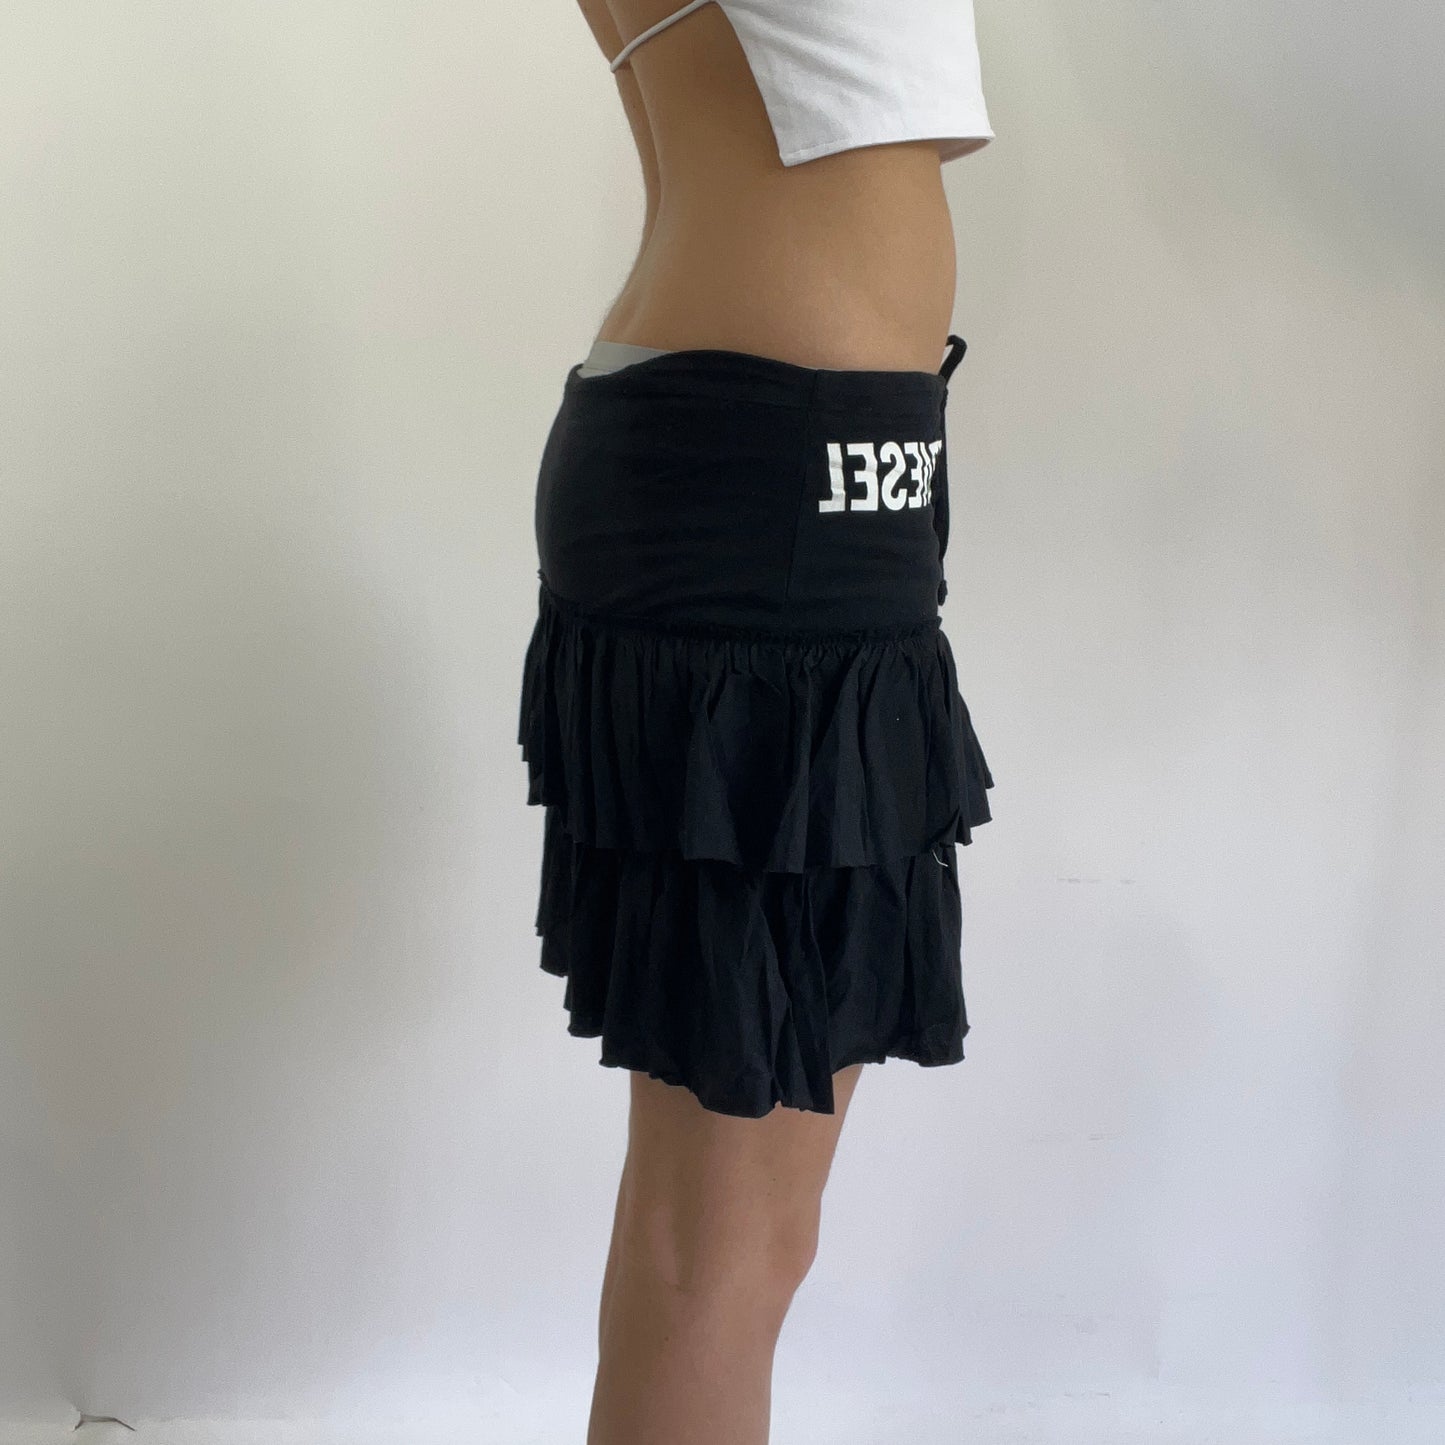 black ruffle skirt with diesel spell out